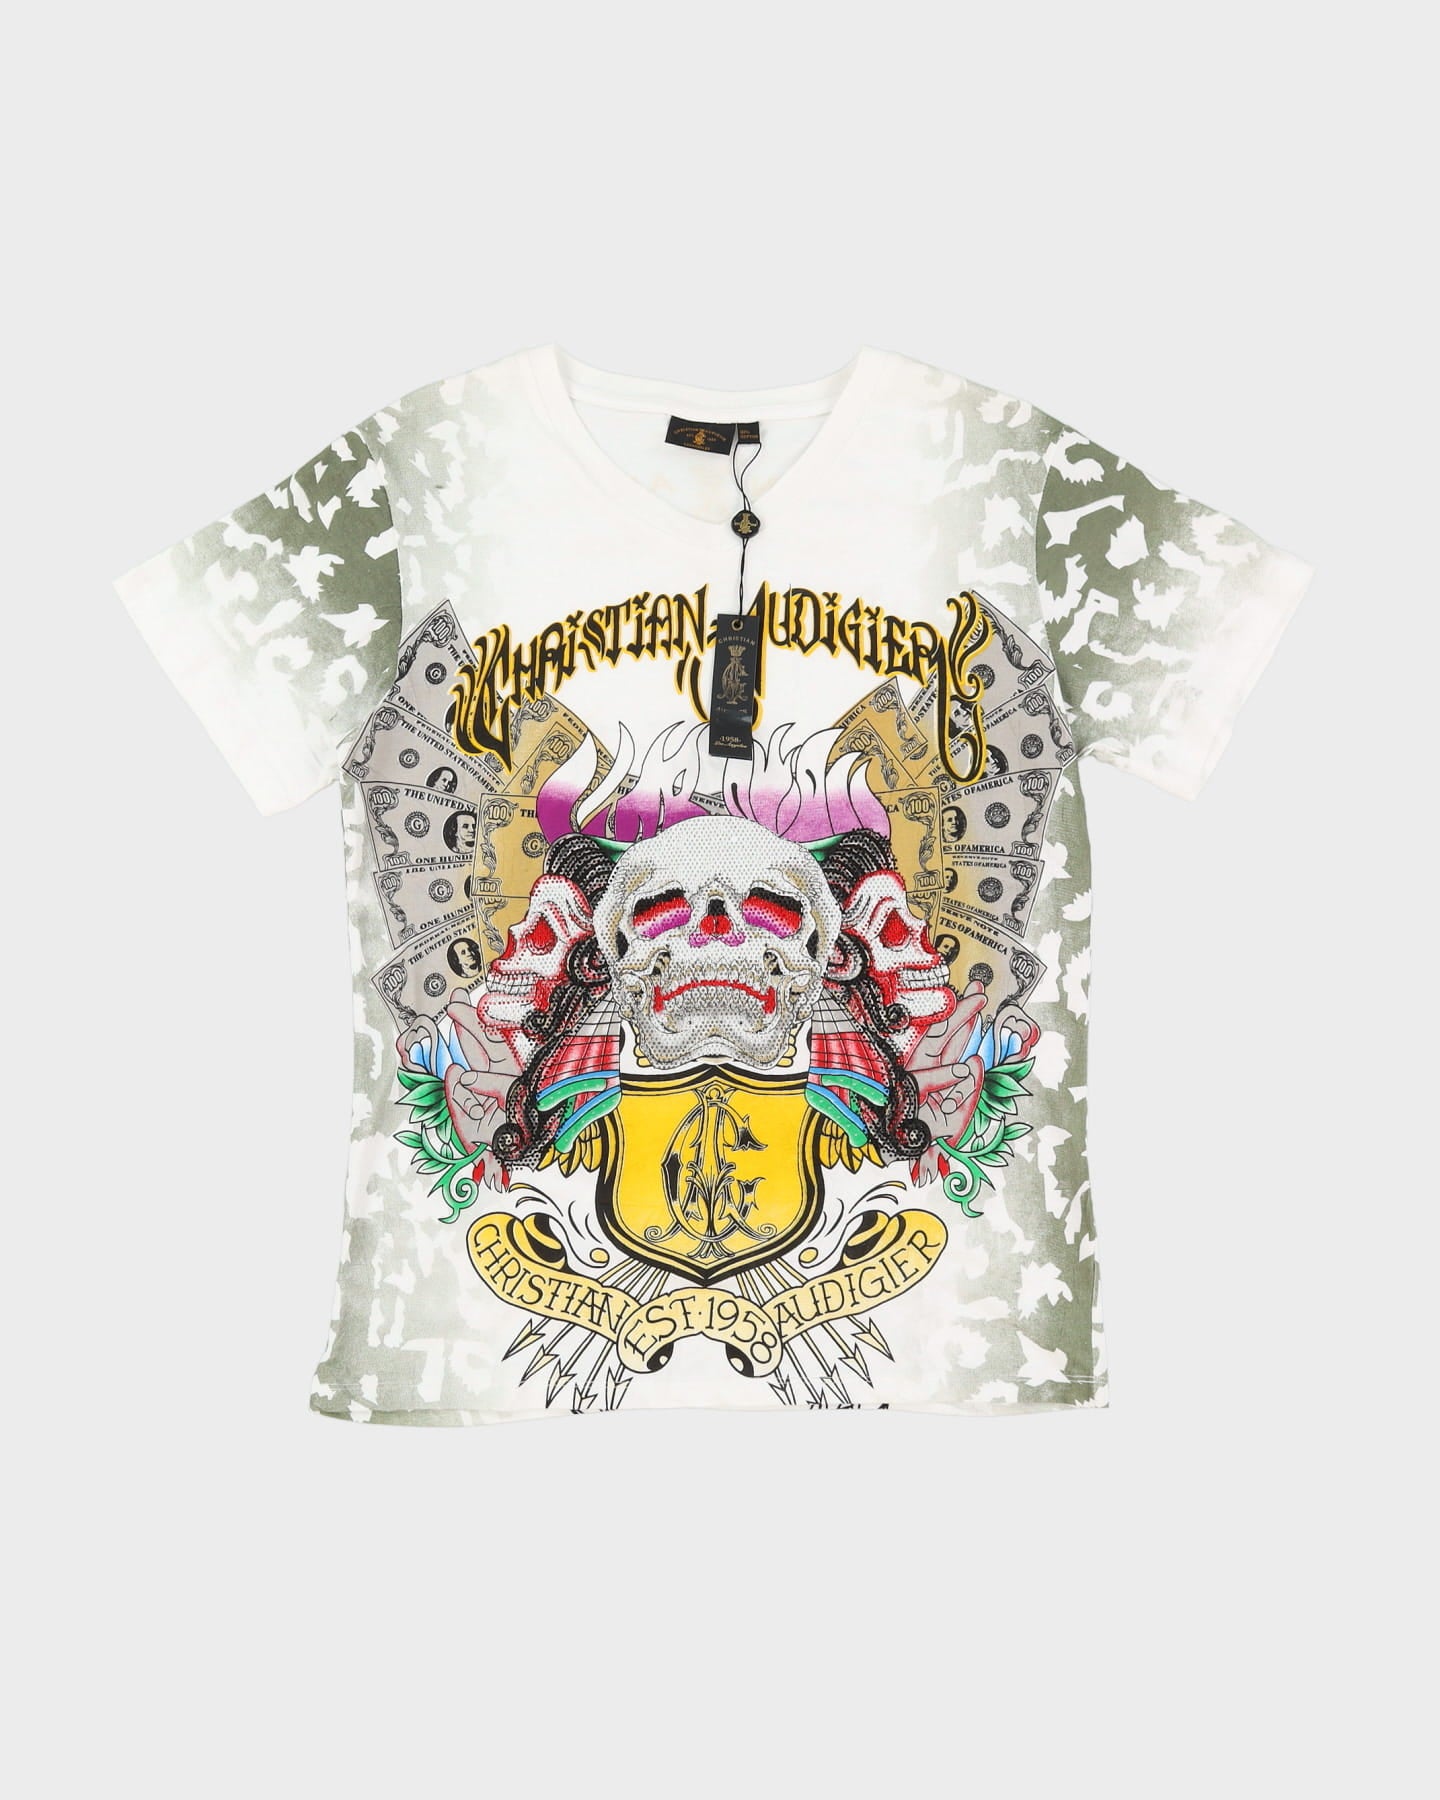 New With Tags Christian Audgier Ed Hardy Style All Over Print White / Multi Coloured T-Shirt - M